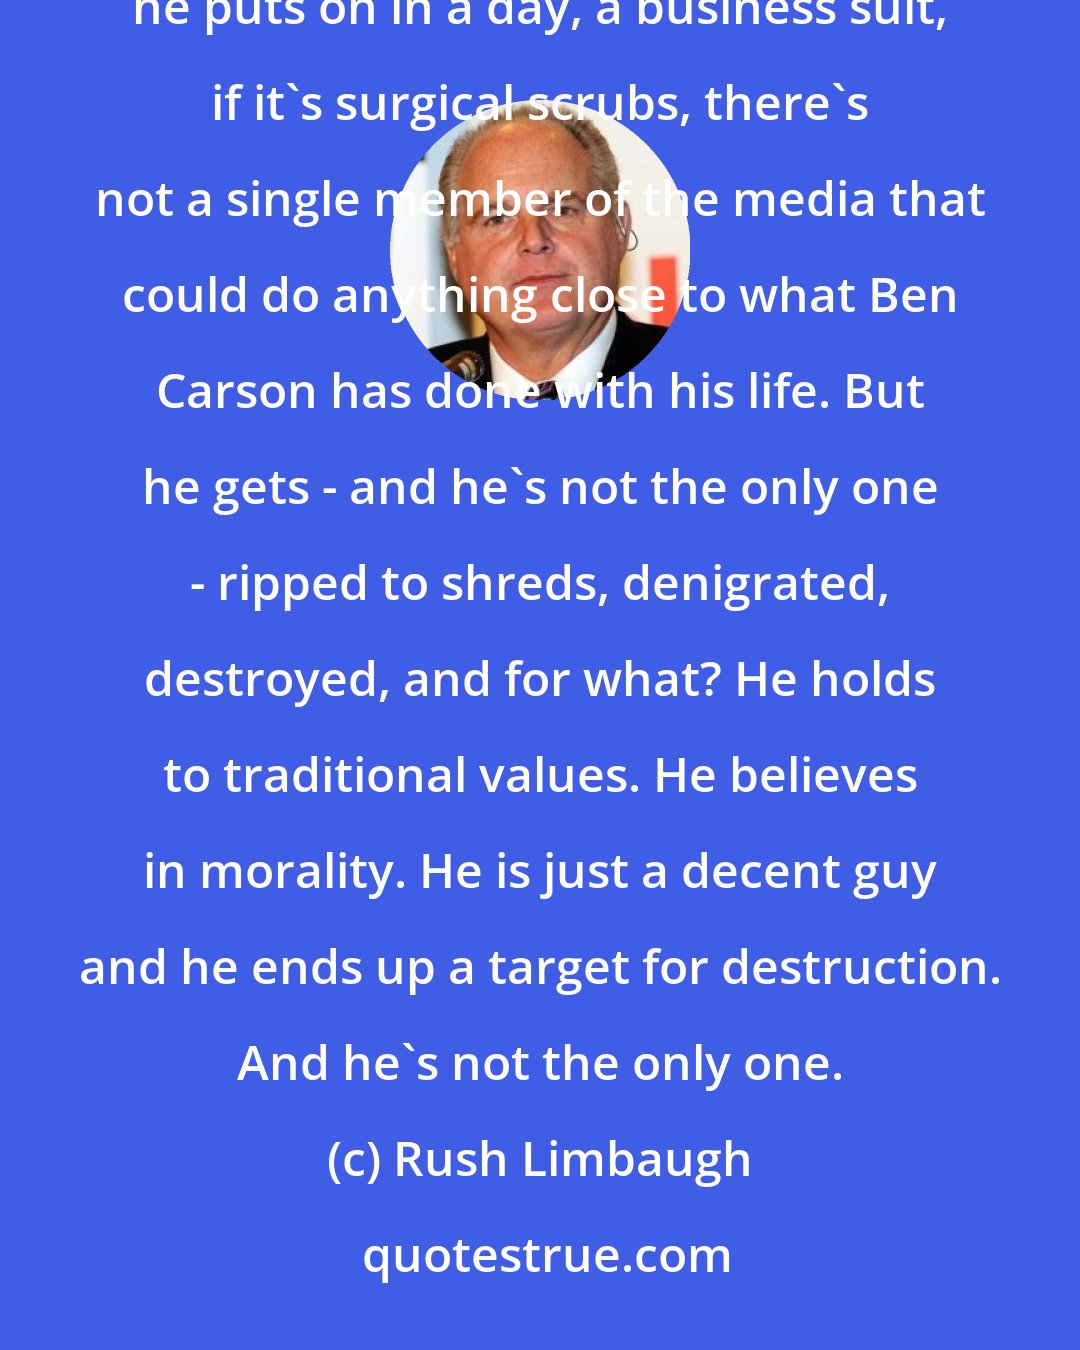 Rush Limbaugh: There is not a single person in the media today that could wear Dr. Benjamin Carson's uniform, whatever uniform he puts on in a day, a business suit, if it's surgical scrubs, there's not a single member of the media that could do anything close to what Ben Carson has done with his life. But he gets - and he's not the only one - ripped to shreds, denigrated, destroyed, and for what? He holds to traditional values. He believes in morality. He is just a decent guy and he ends up a target for destruction. And he's not the only one.